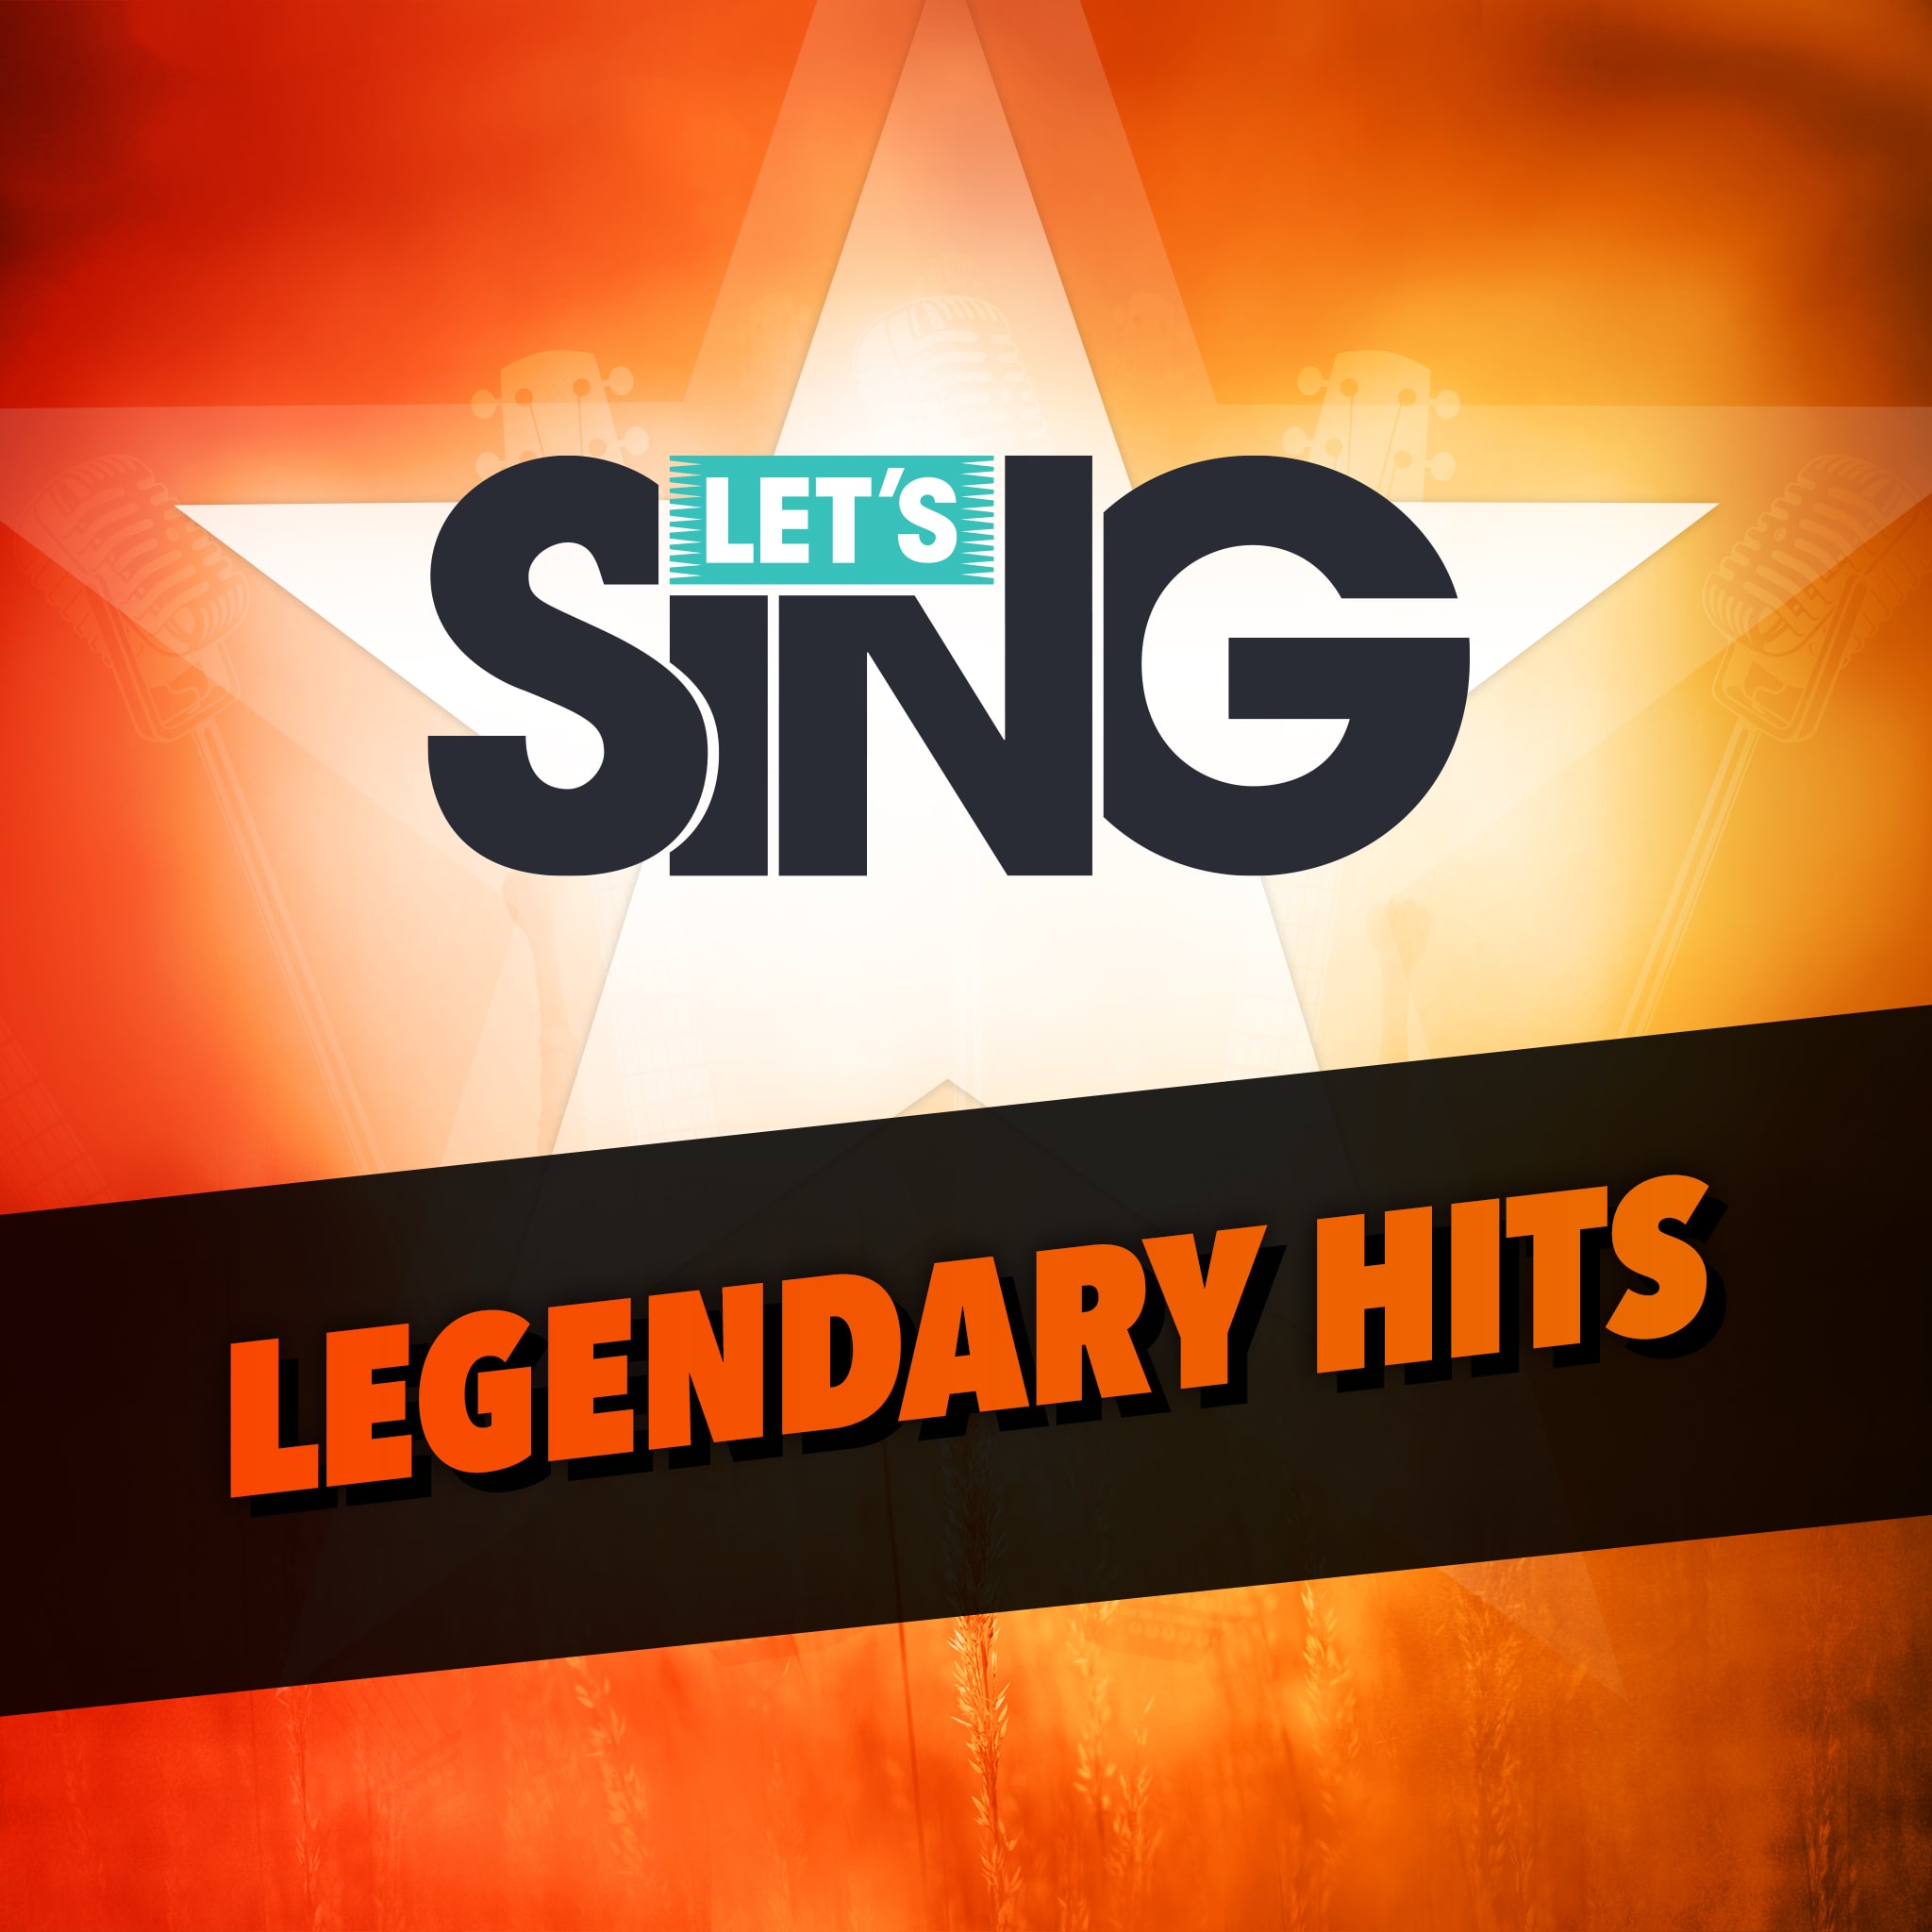 Let's Sing - Legendary Hits Song Pack